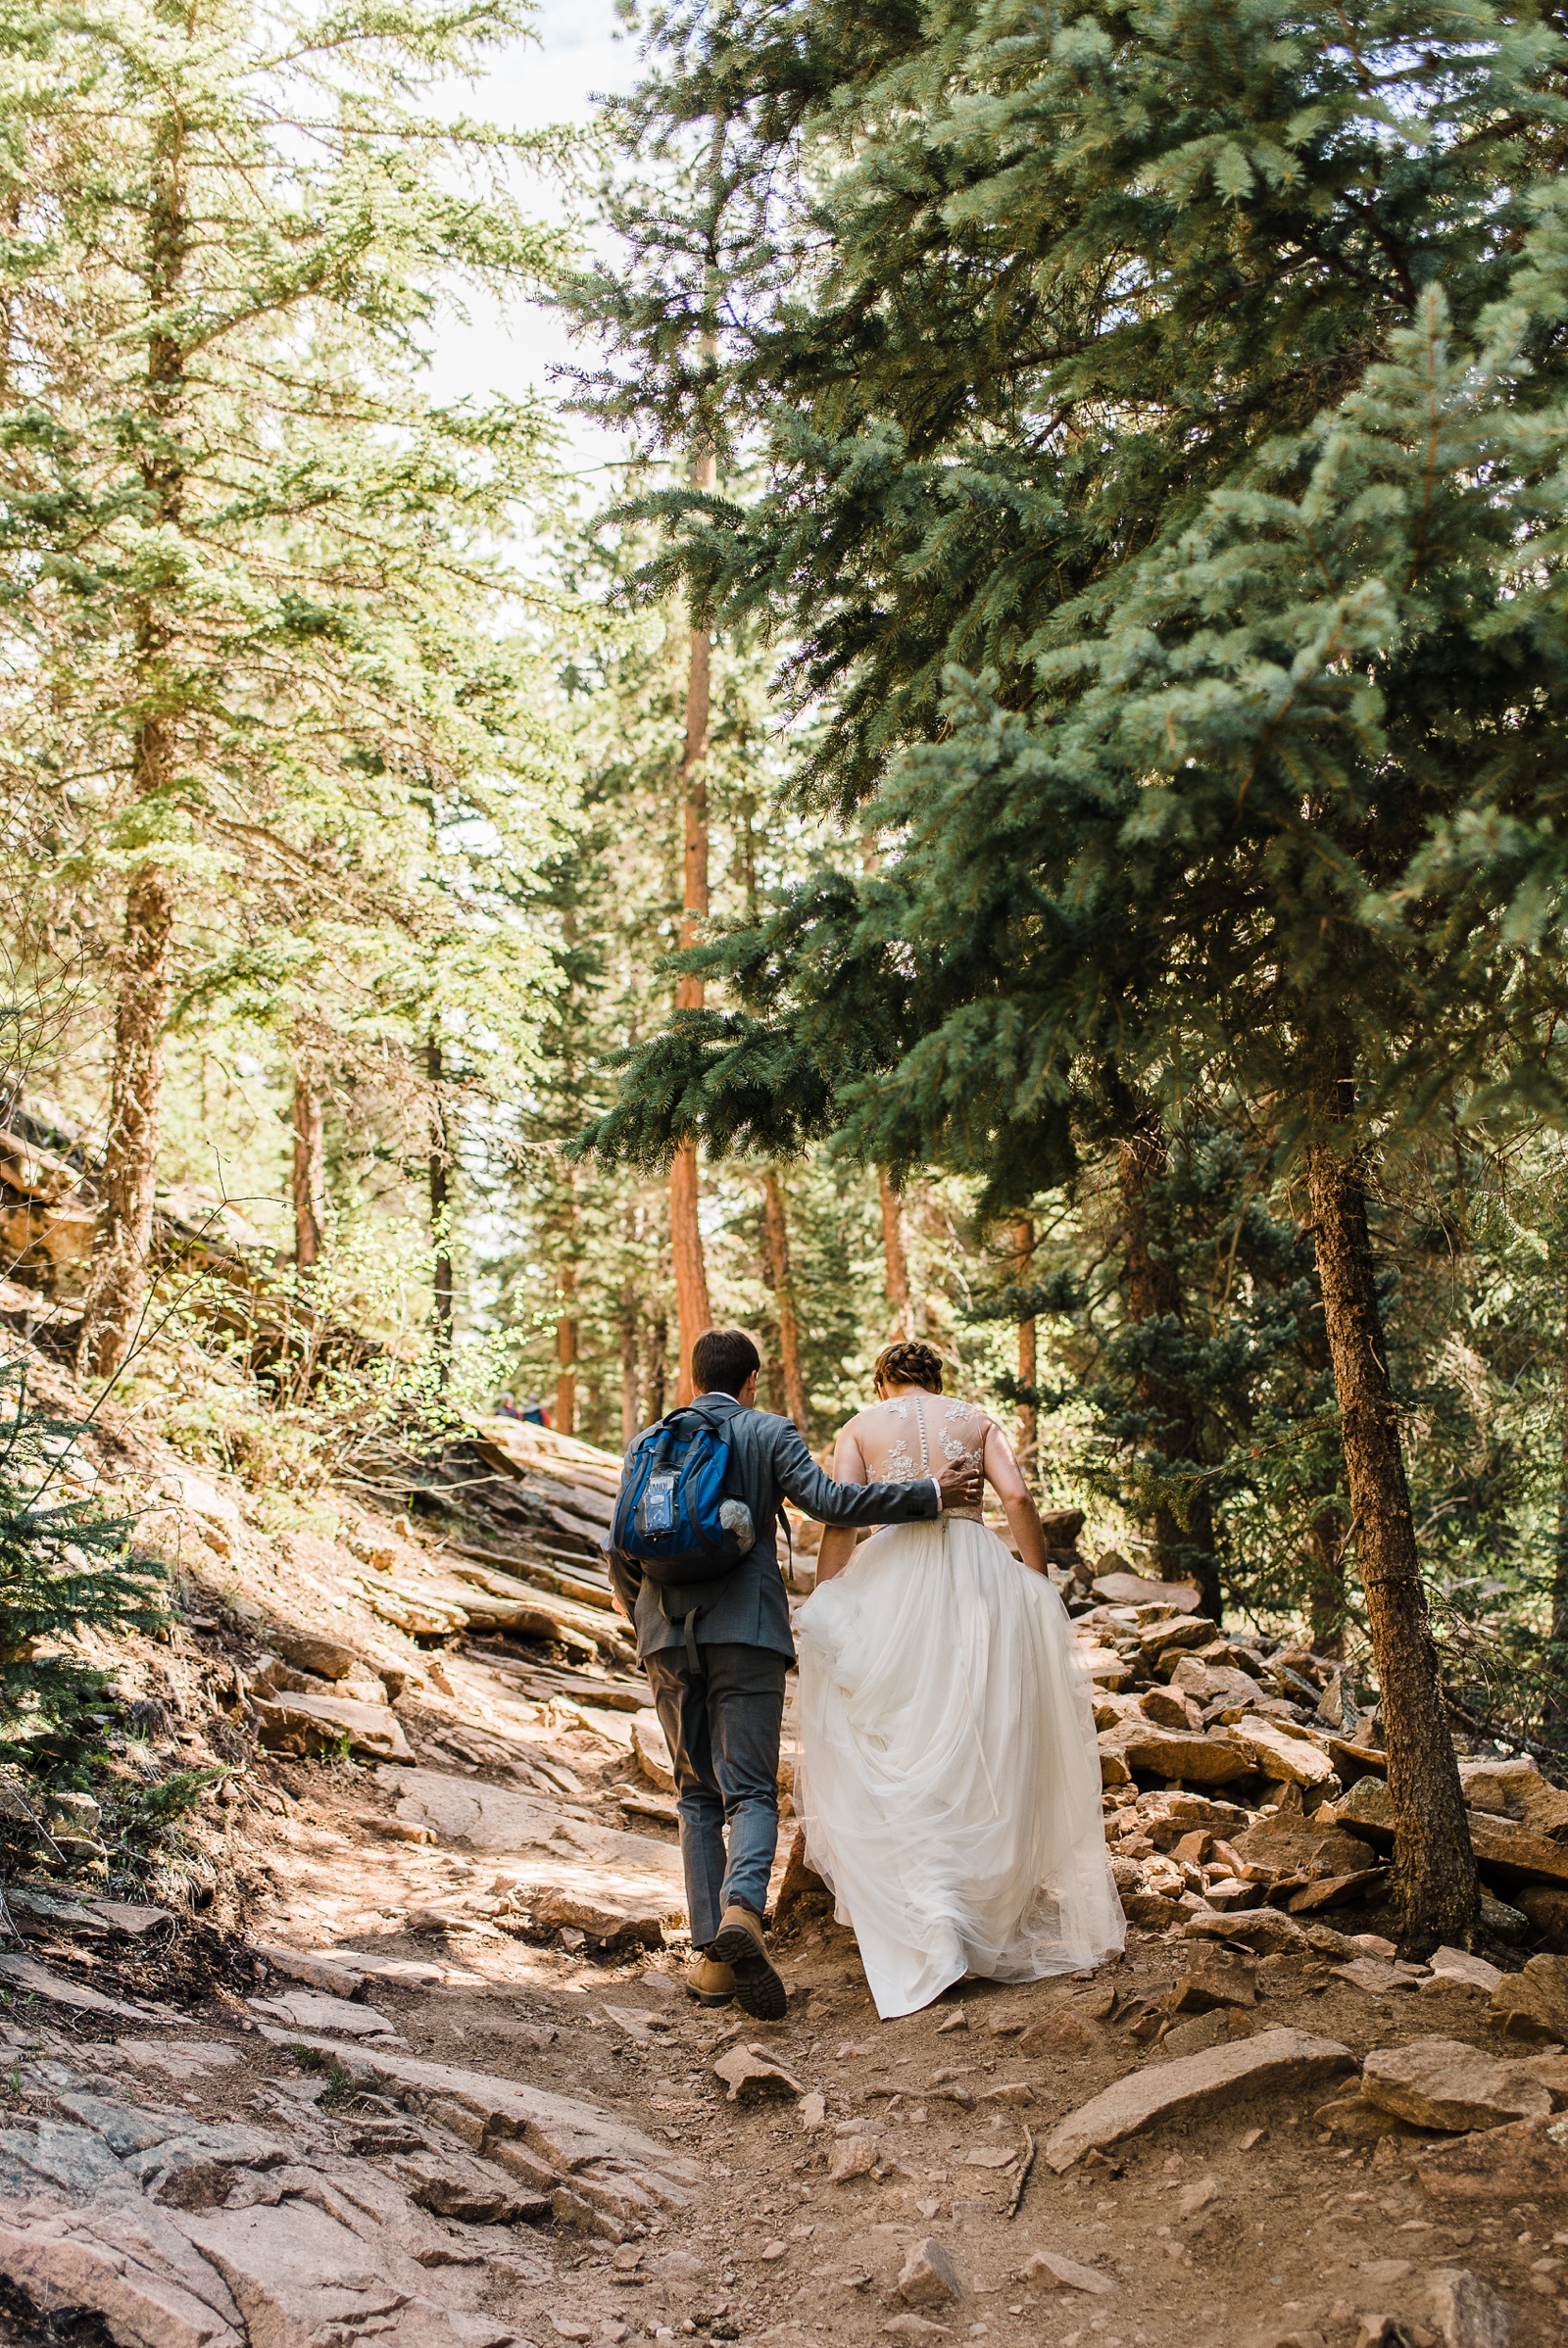 Groom with hand on bride's back leading up hiking trail